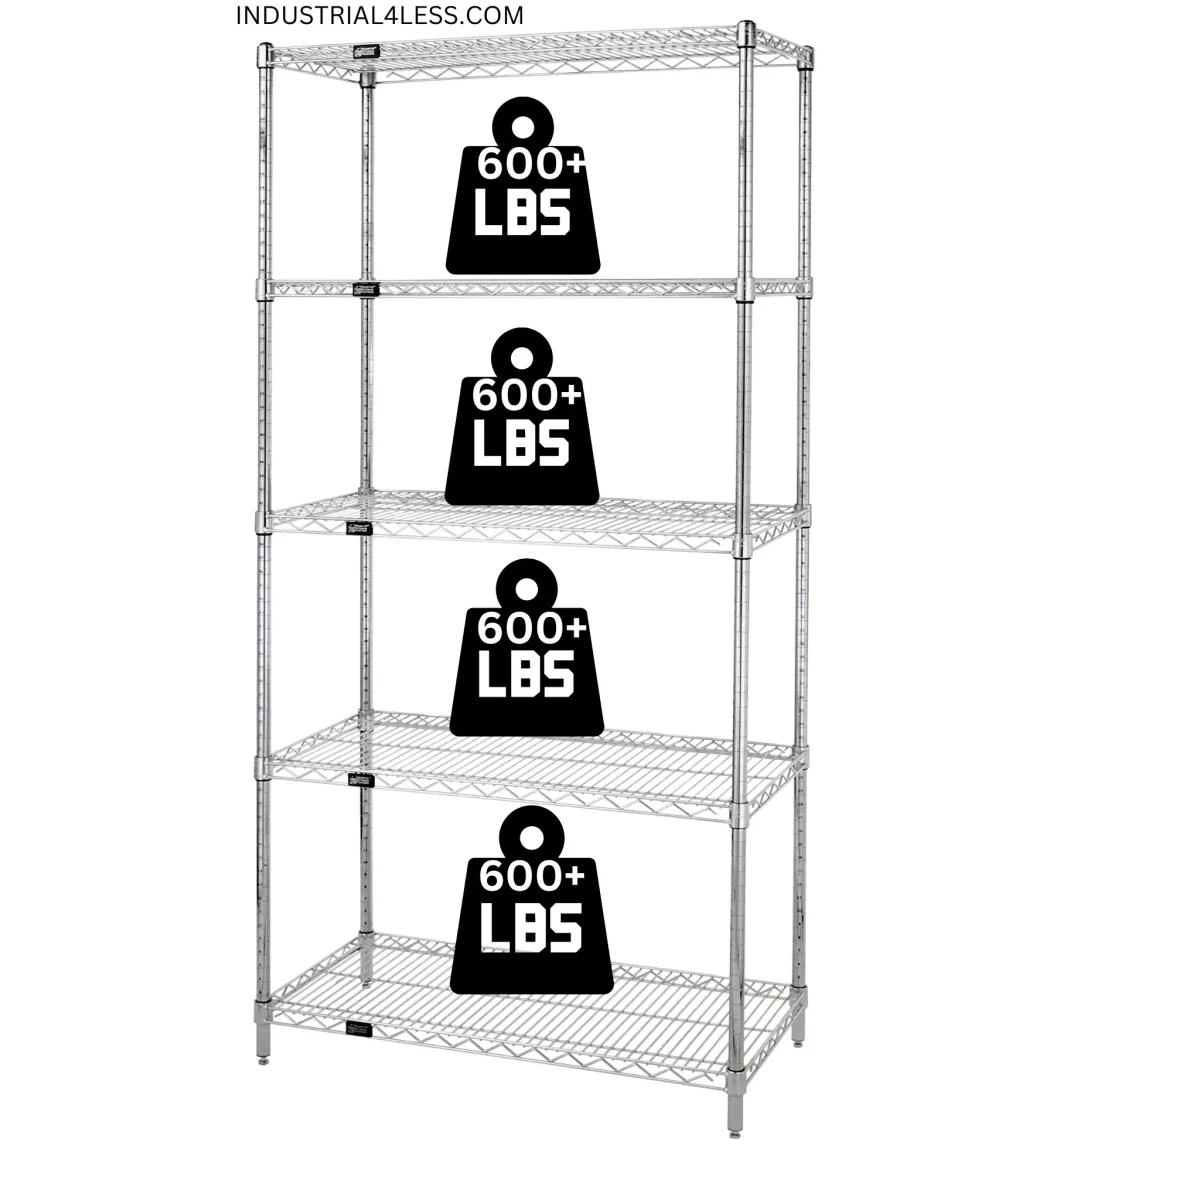 24" x 36" Stainless Steel Wire Shelving Unit - Industrial 4 Less - 24365S-5